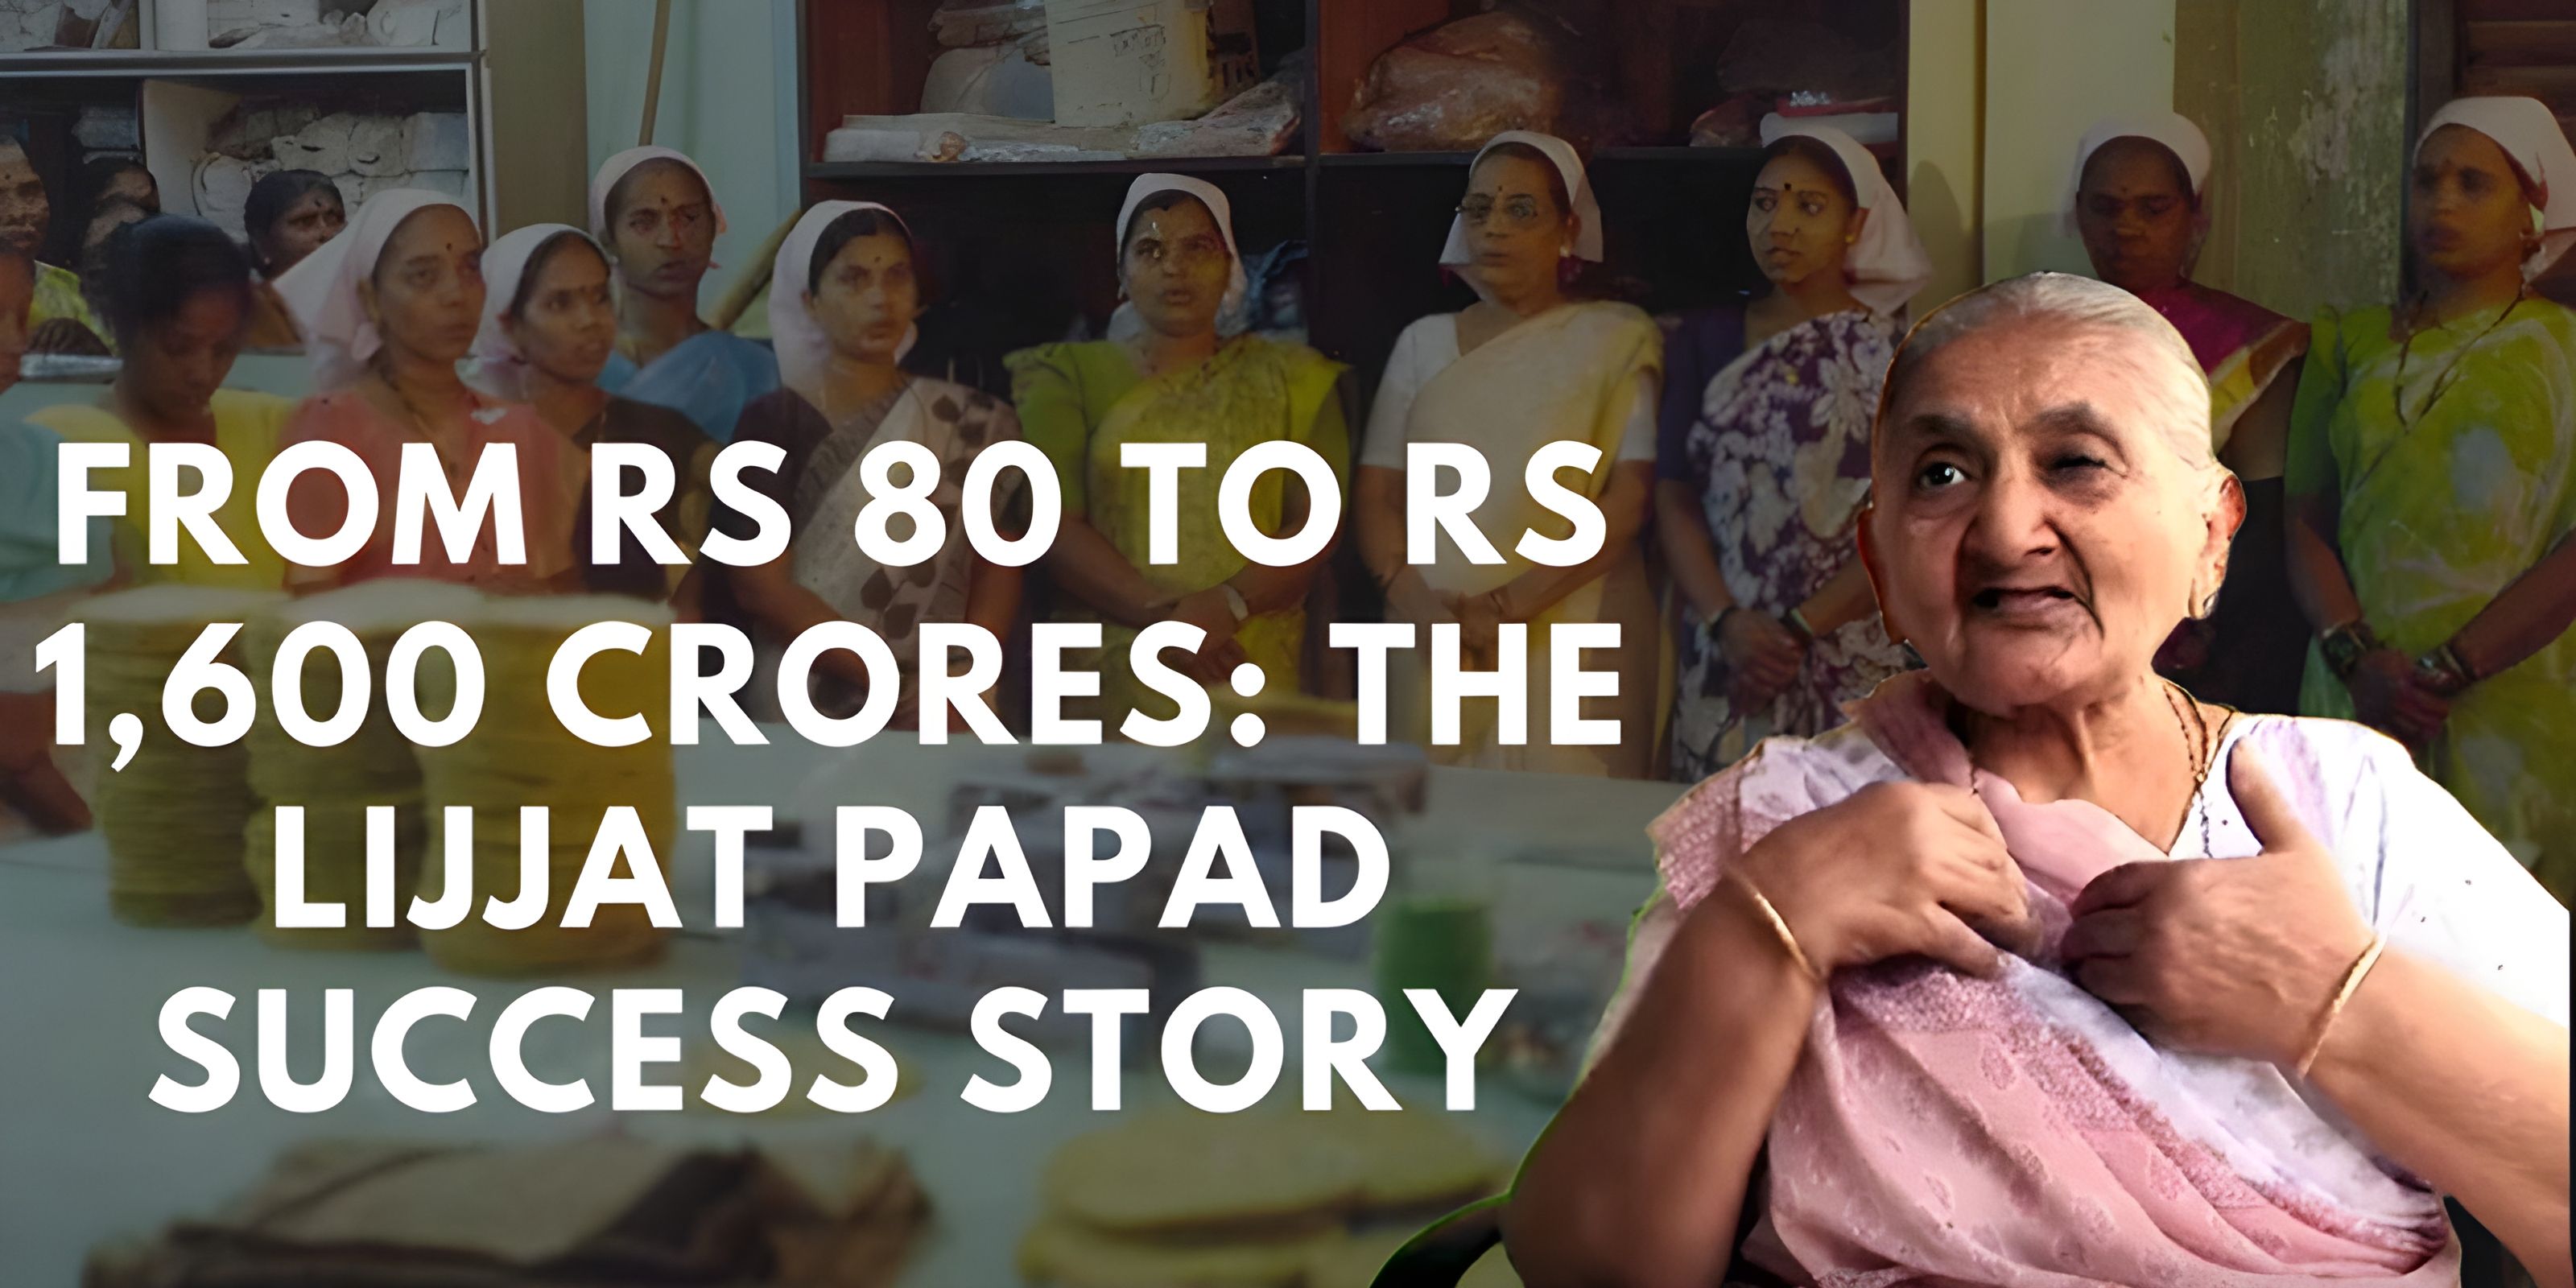 From Rs 80 to Rs 1,600 Crores: The Lijjat Papad Success Story